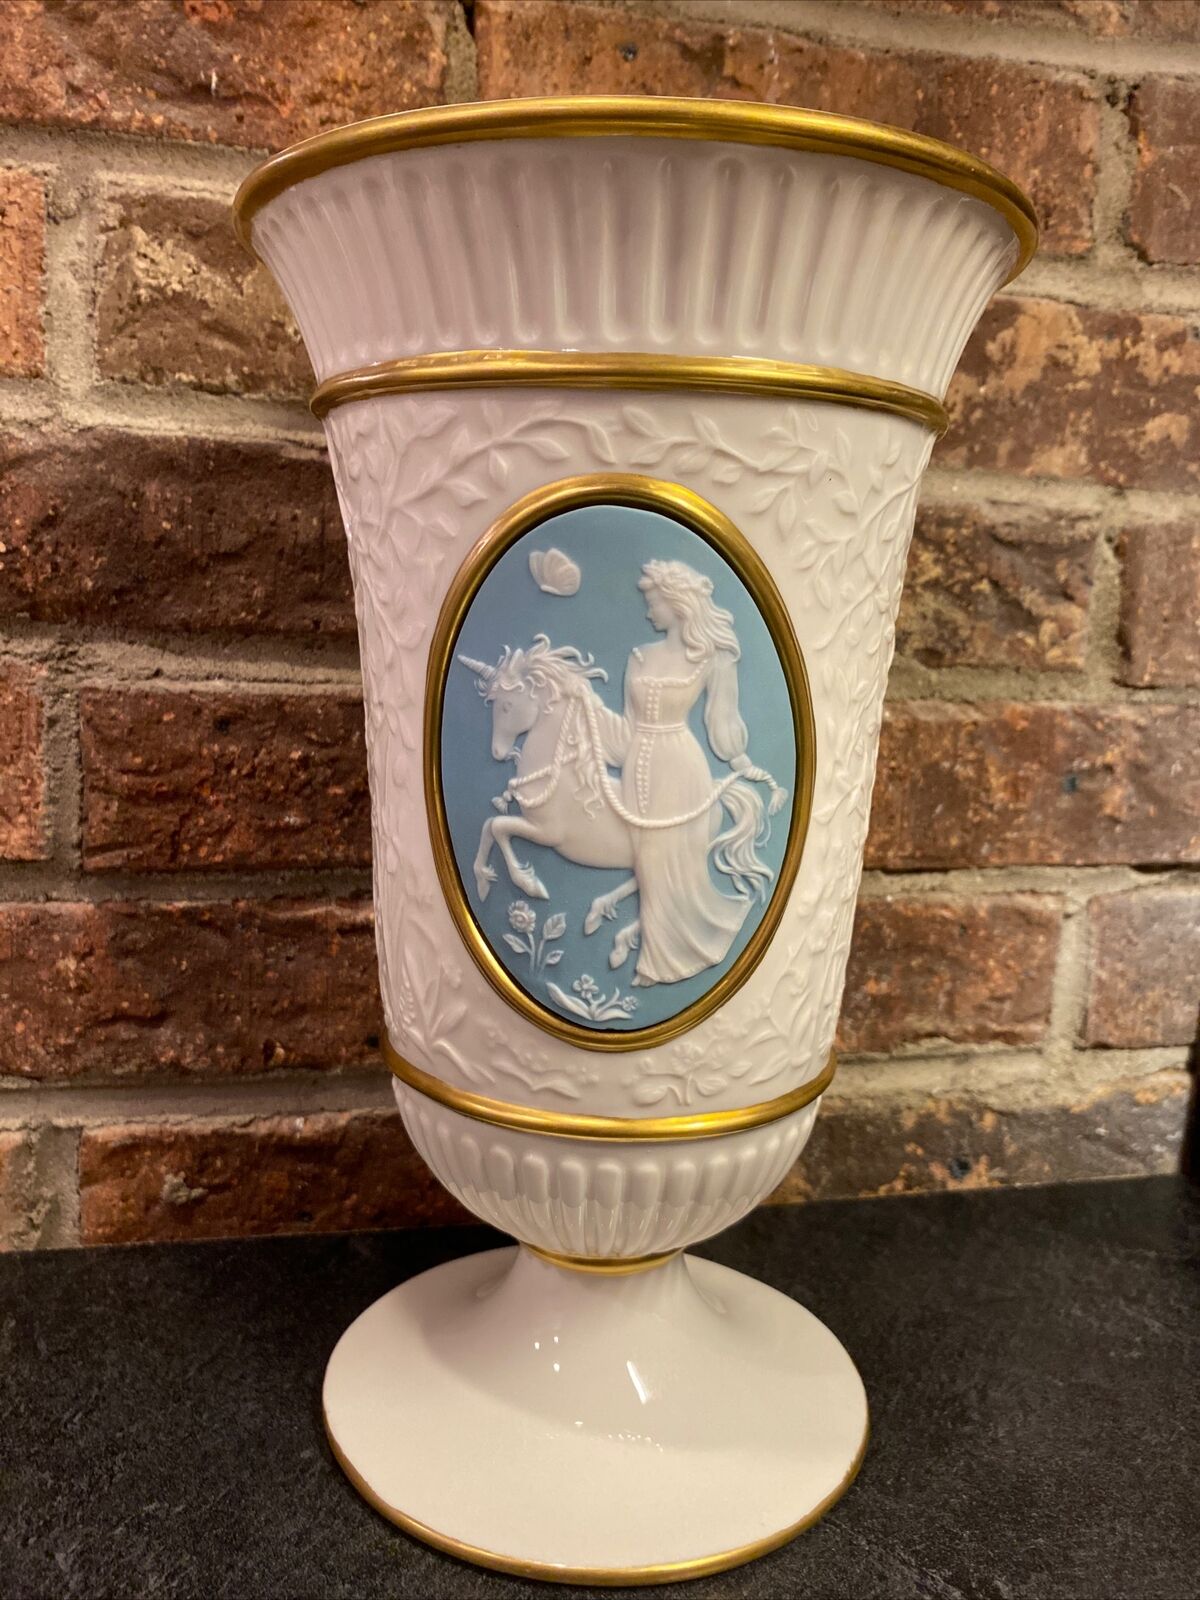 RARE 1991 Franklin Mint “The Lady And The Unicorn” Porcelain Vase- See Pics